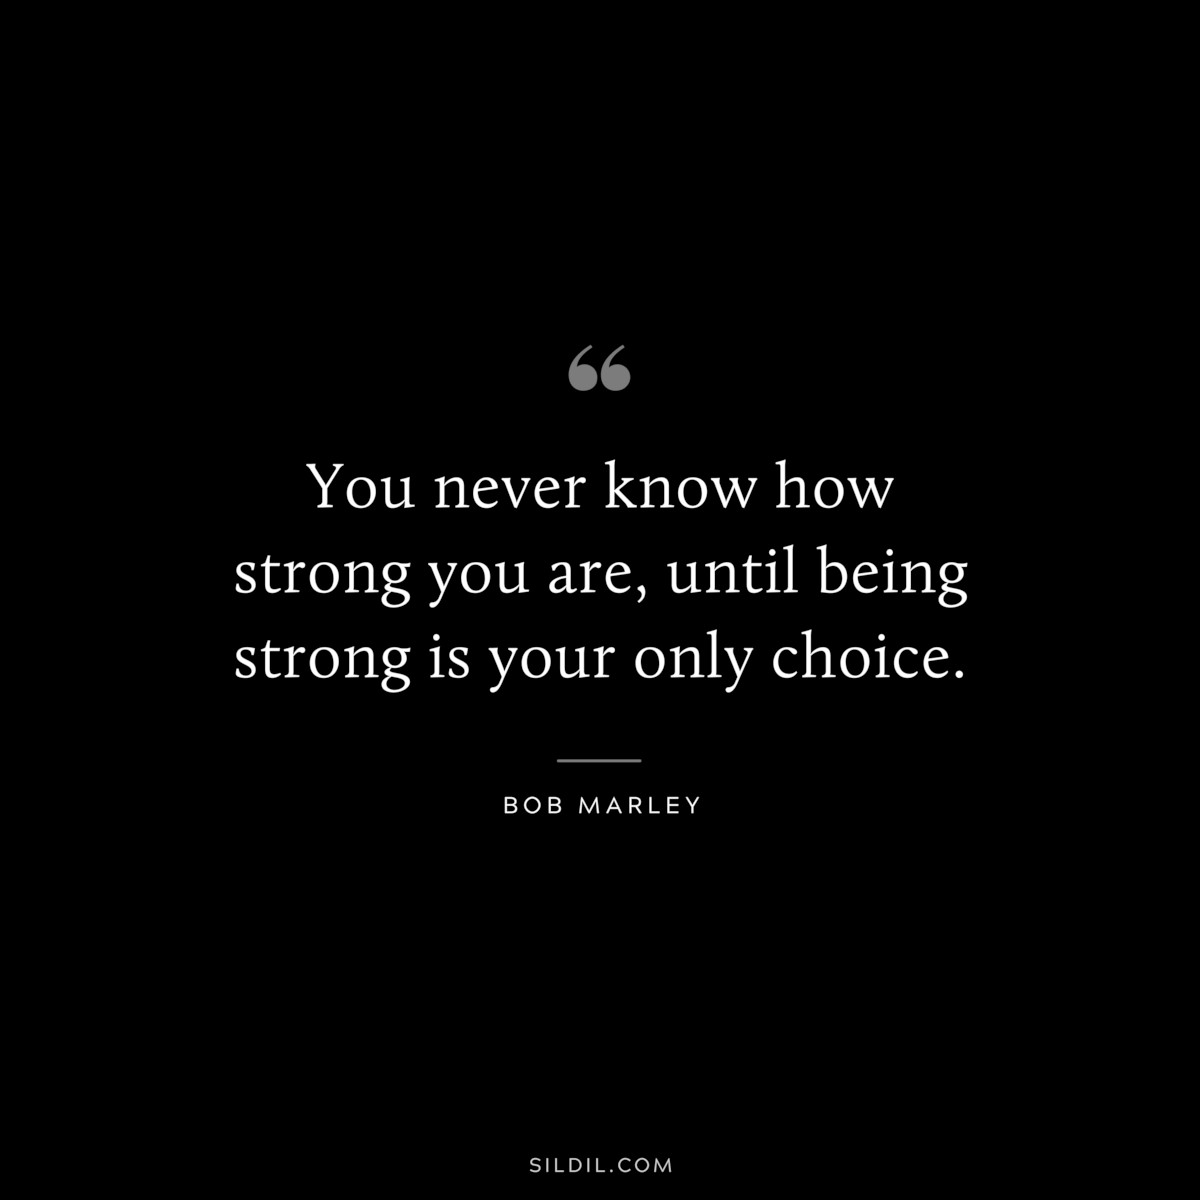 You never know how strong you are, until being strong is your only choice. ― Bob Marley